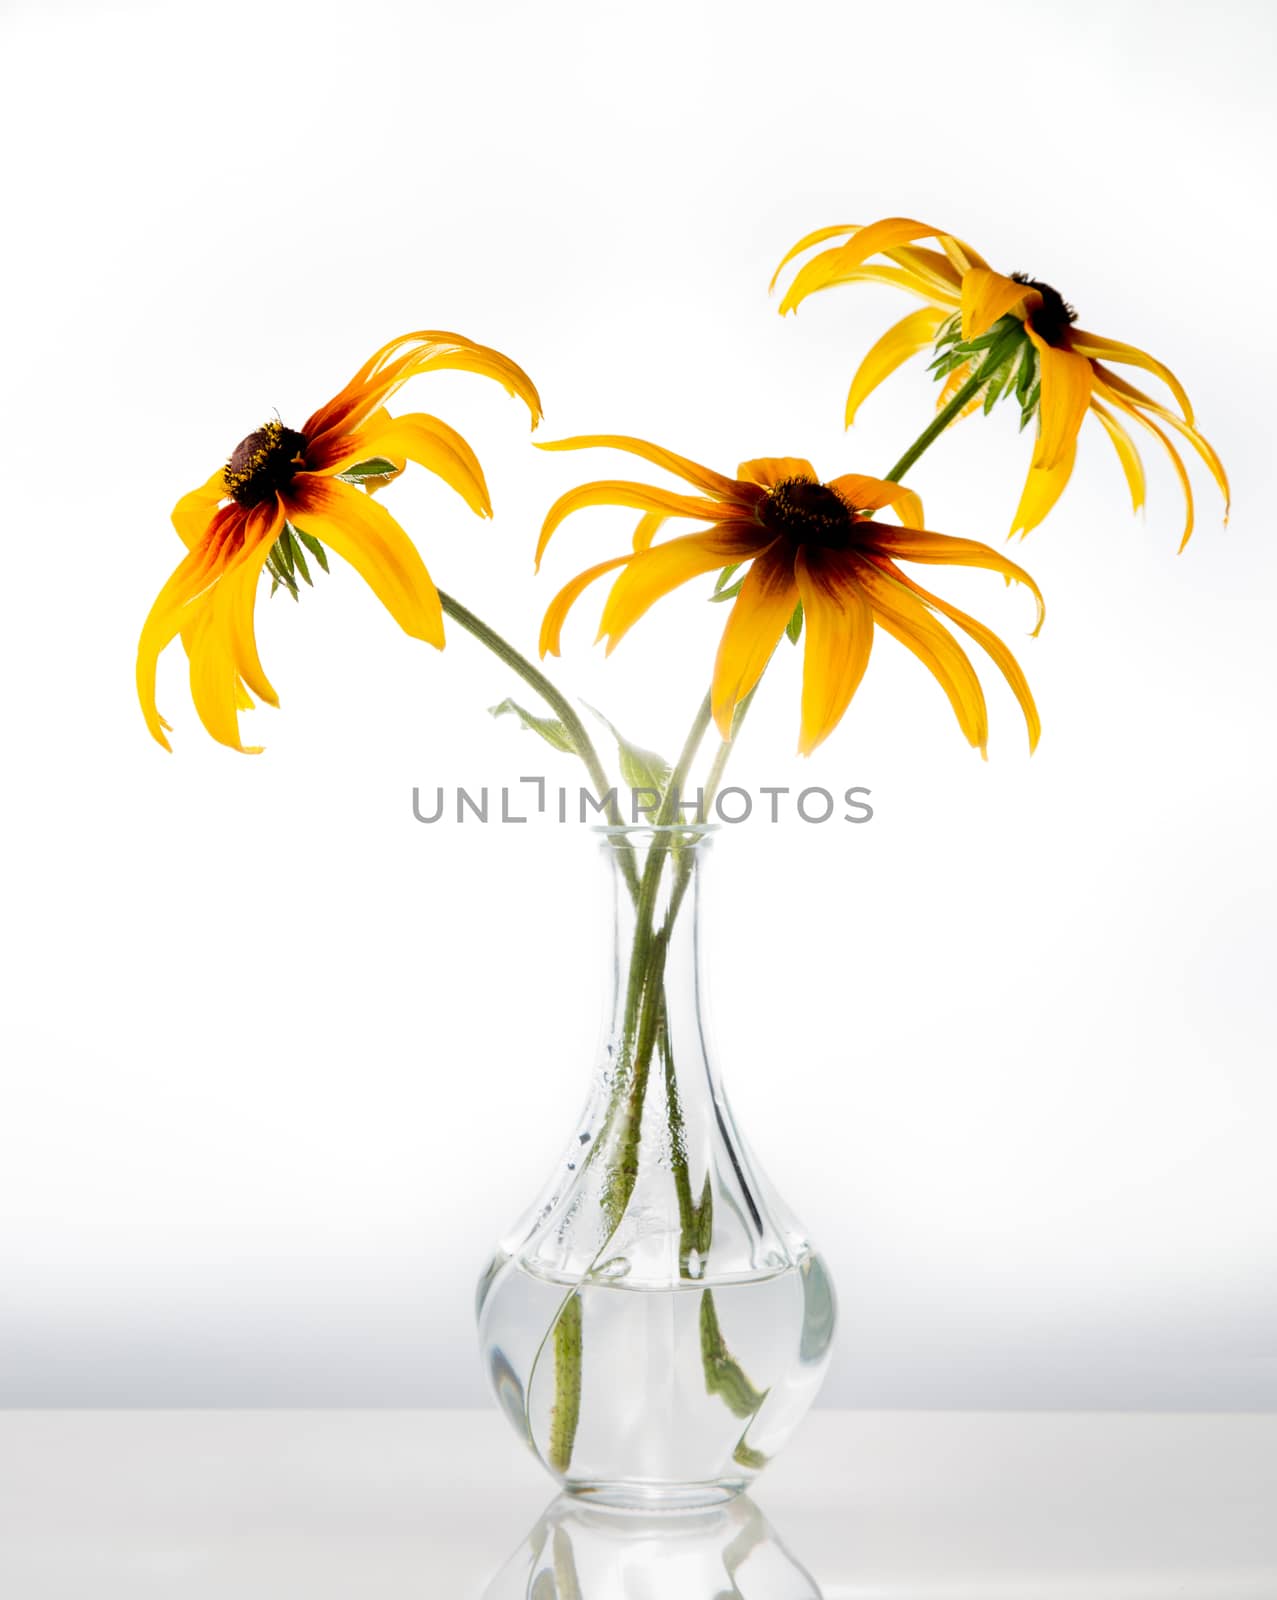 Orange gardens daisies rudbeckia Black-Eyed Susan flowers in a vase on white background artistic still life . High quality photo